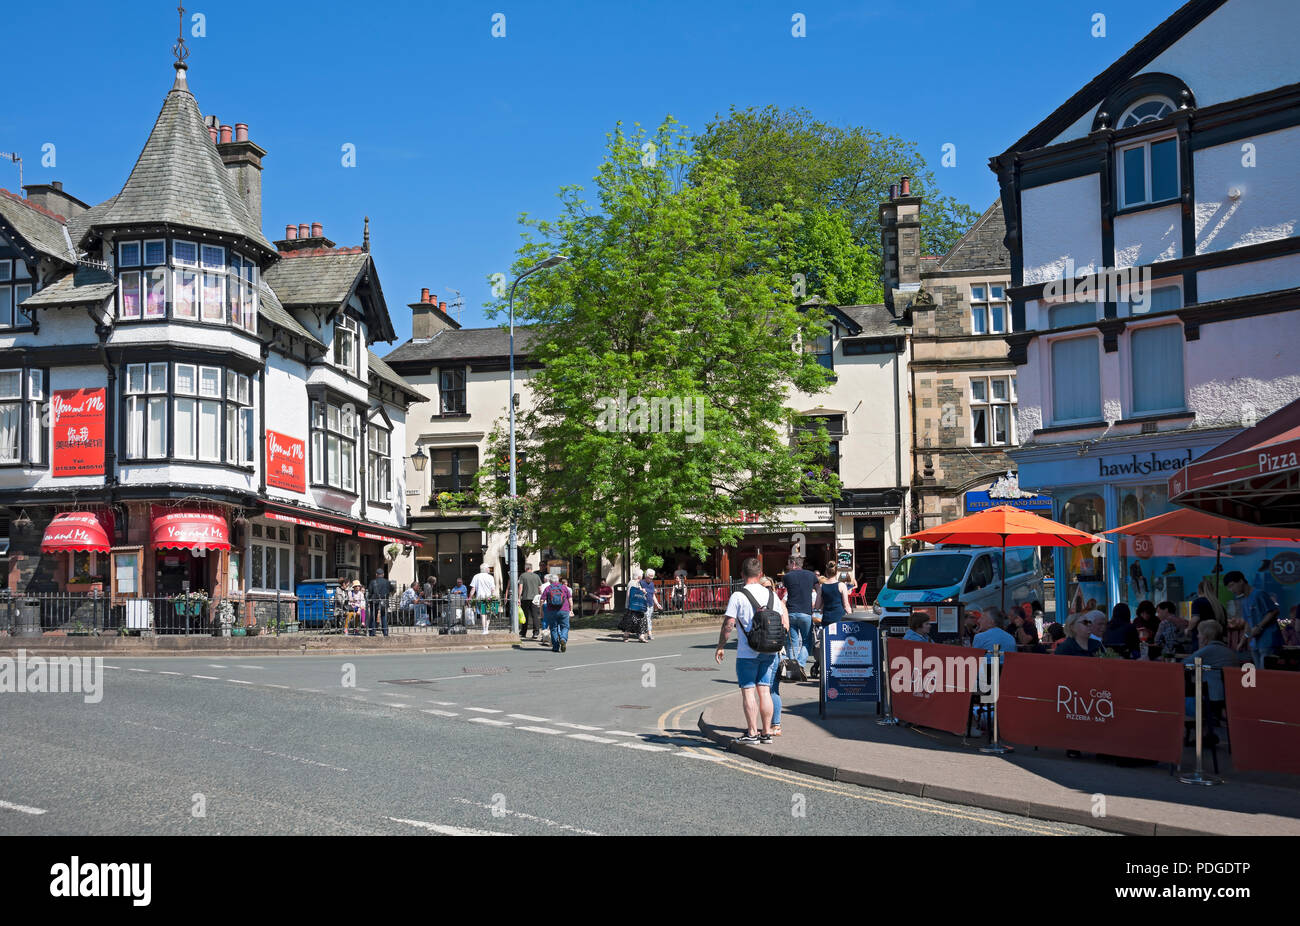 Tourists visitors in the town centre outdoor seating restaurants and bars summer Bowness on Windermere Cumbria England UK United Kingdom Great Britain Stock Photo